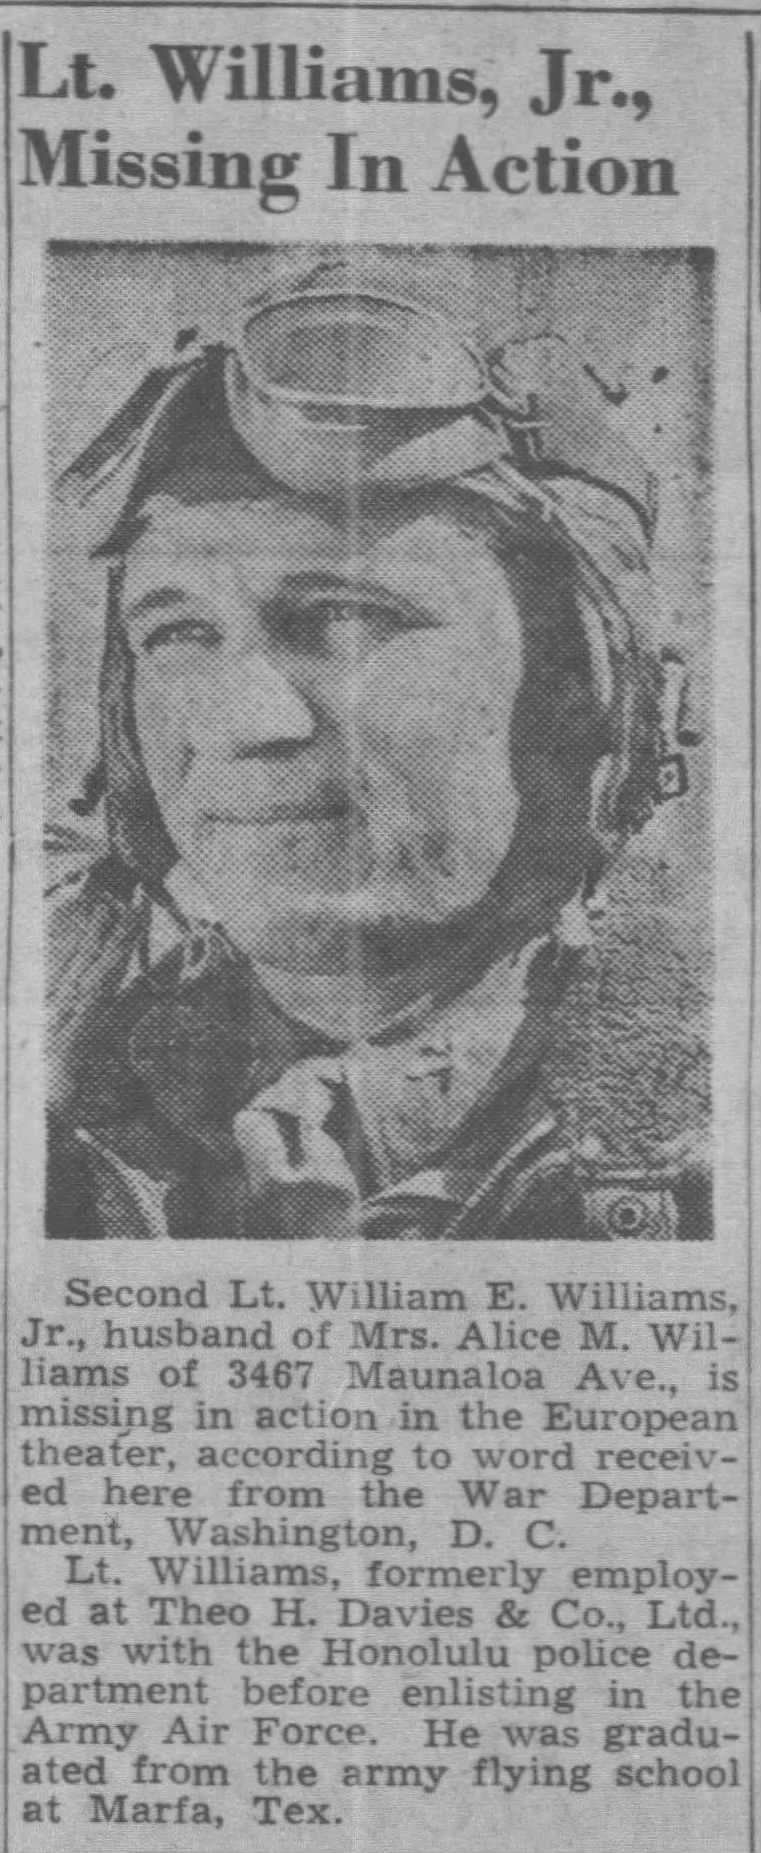 Honolulu Advertiser, 19 May 1944 edition-  Lt. Williams Jr Missing in Action